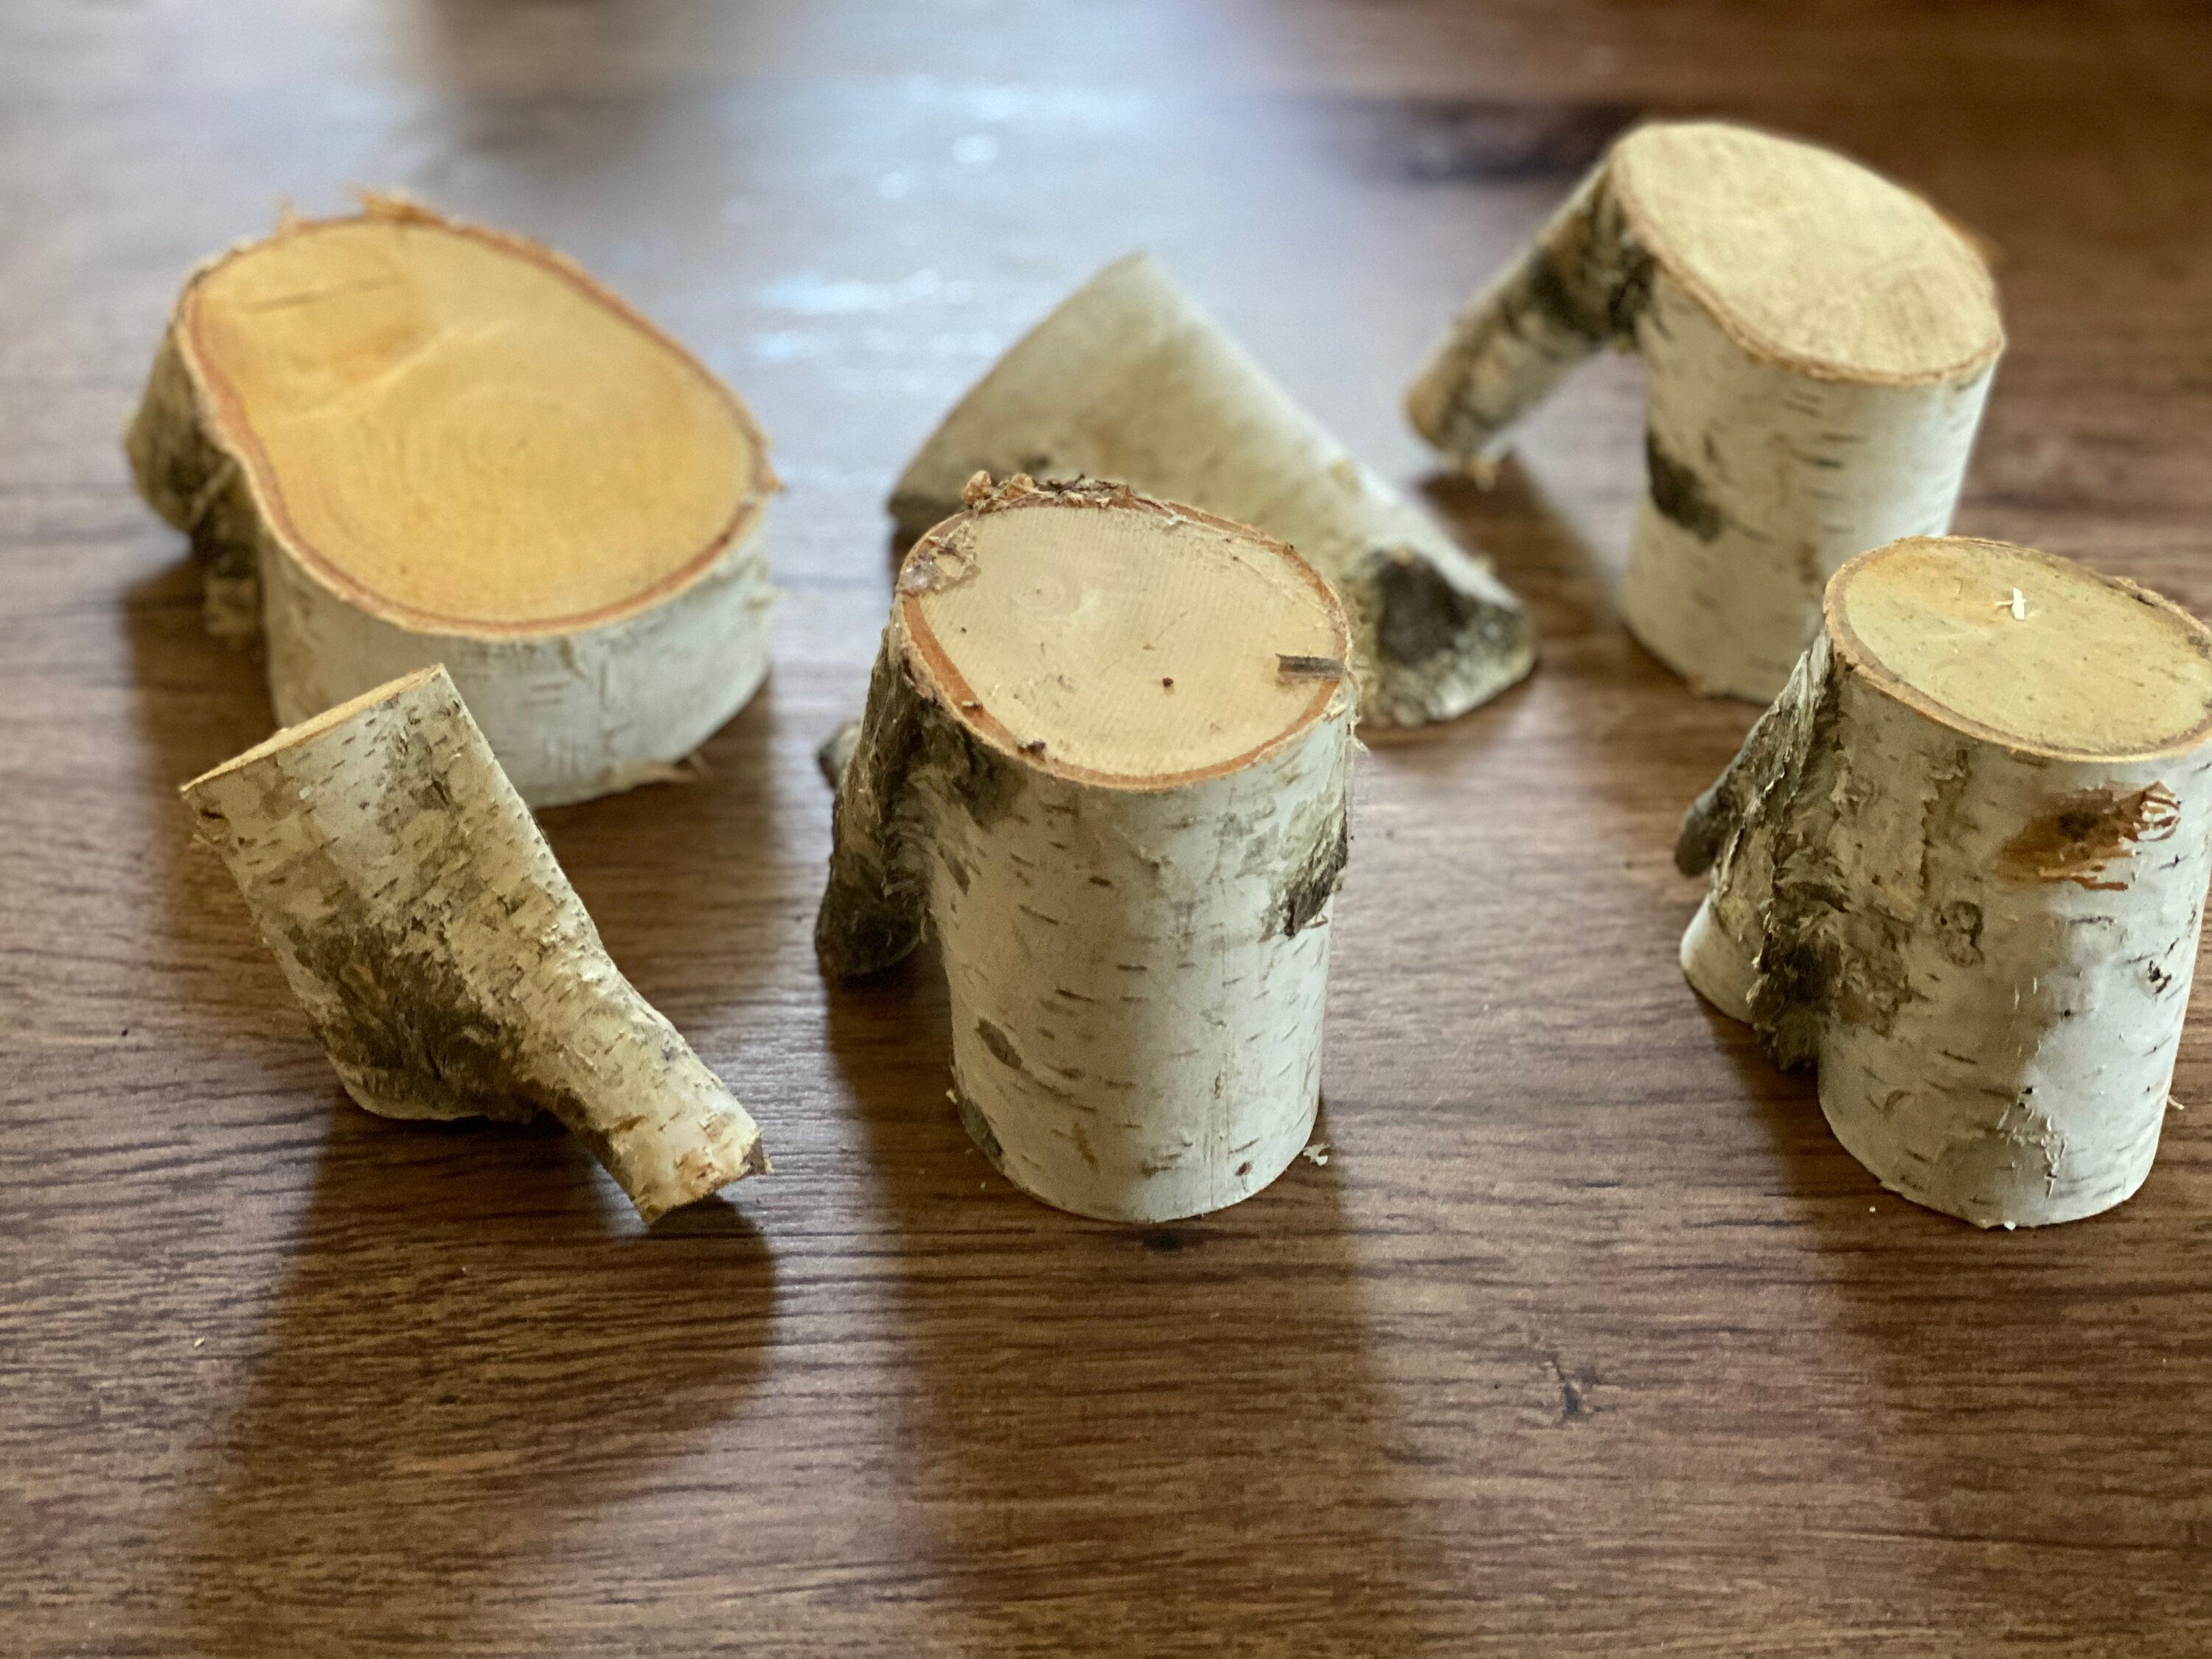 Six Unique White Birch Pieces, 6 Count, 2-5 Inches Long by 3-6 Inches Wide and 2-3.5 Inches Thick